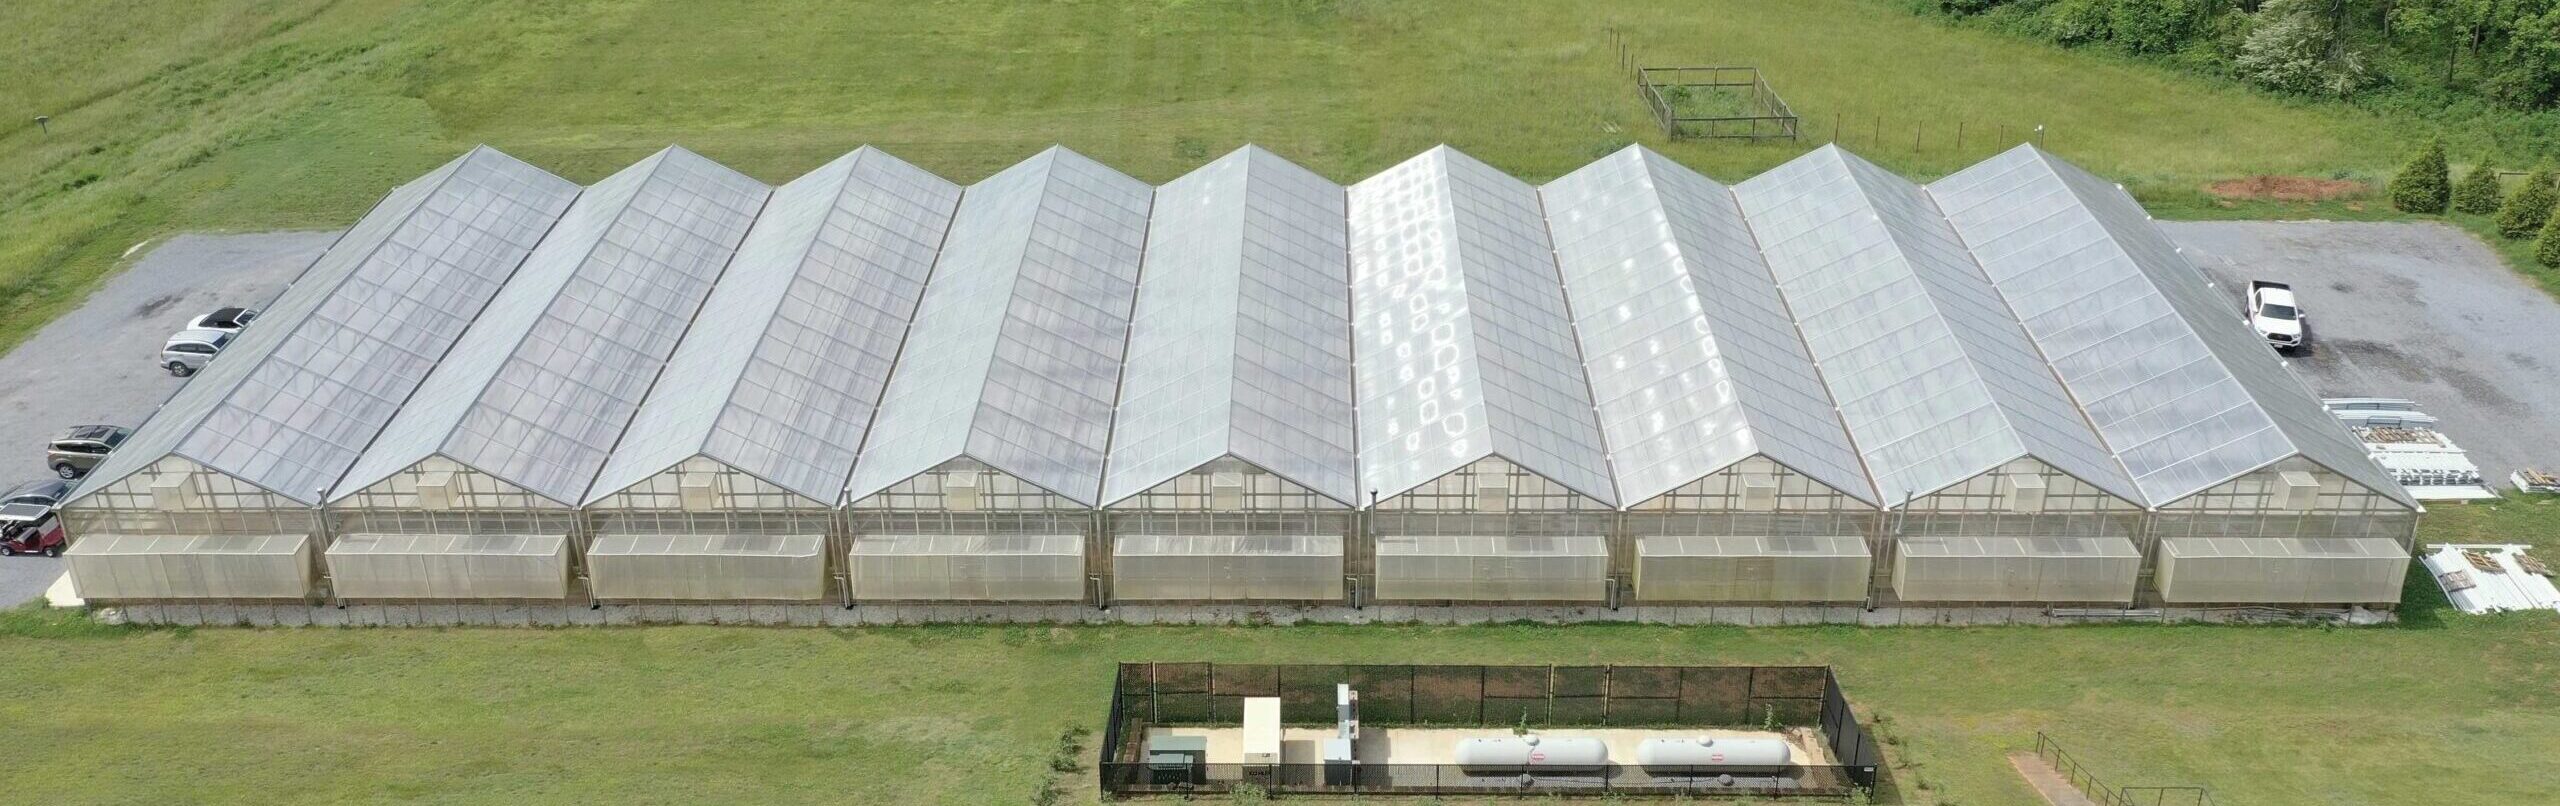 Gutter-connected greenhouse used for greenhouse farming